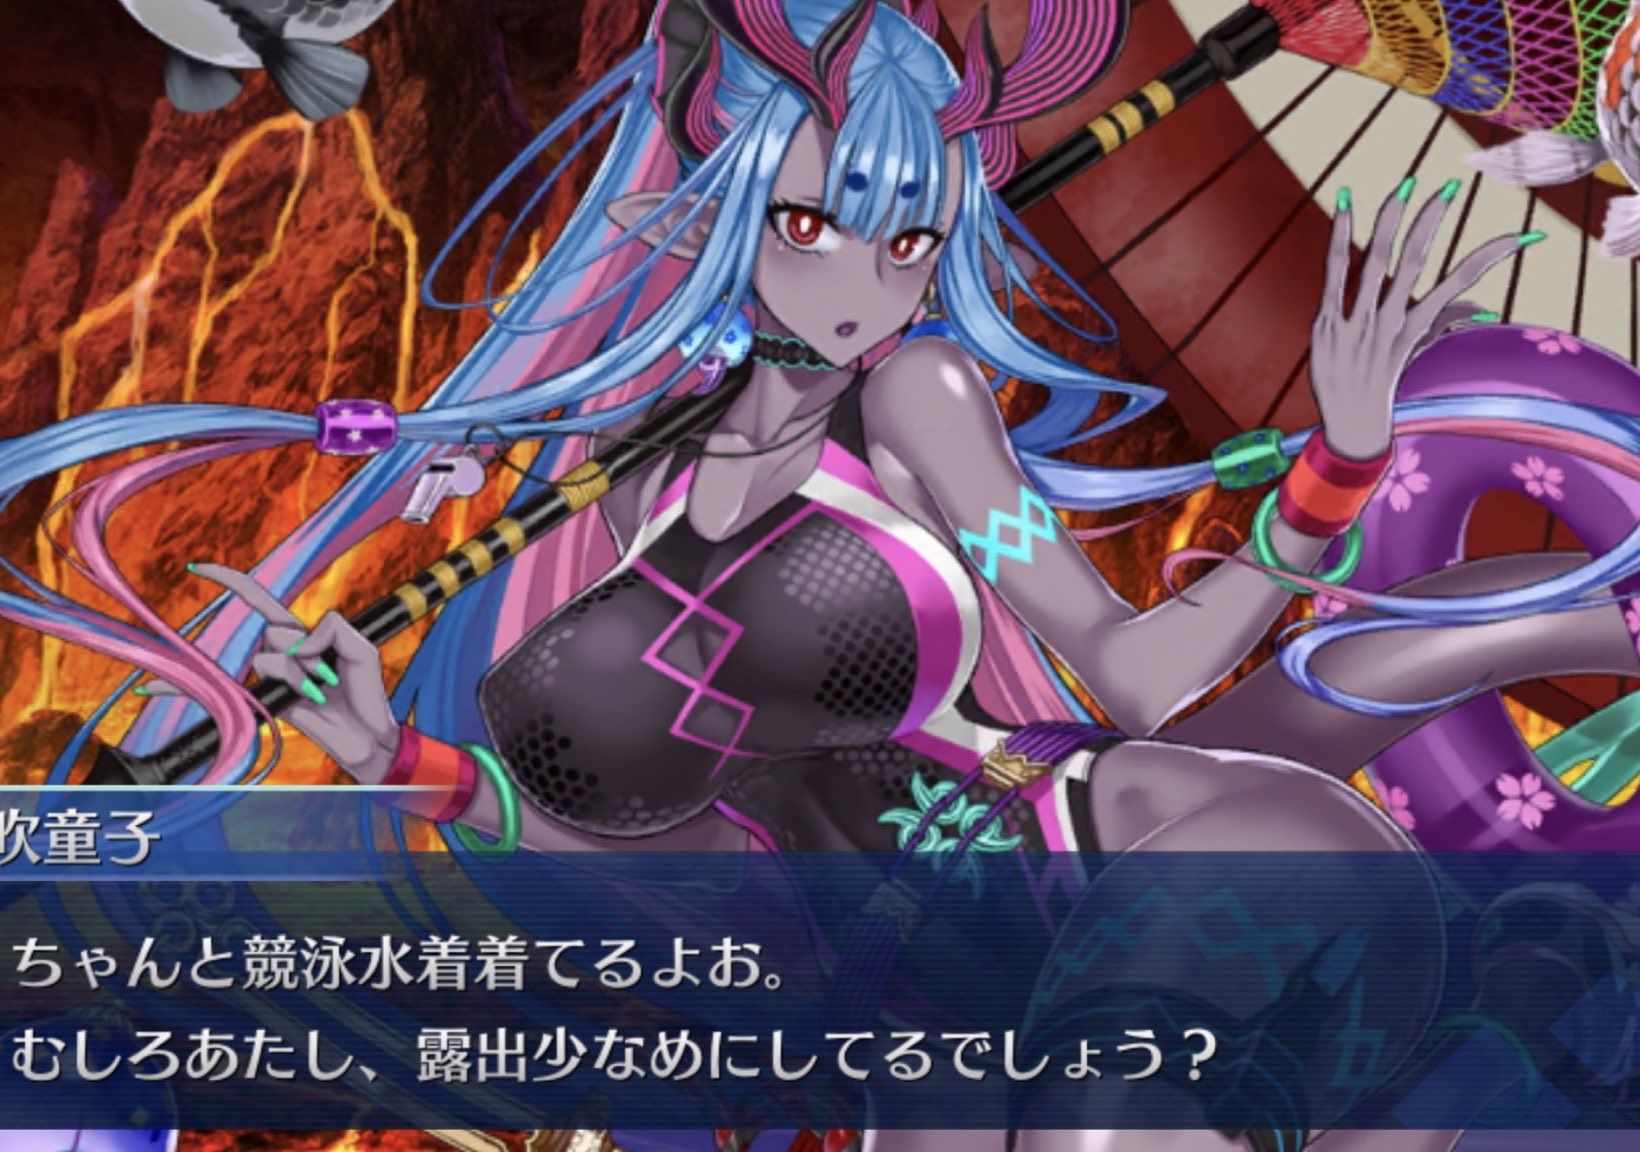 【Sad News】 FGO, the character of the swimsuit event is too uncomfortable and the no age limit is slapped as abnormal 5